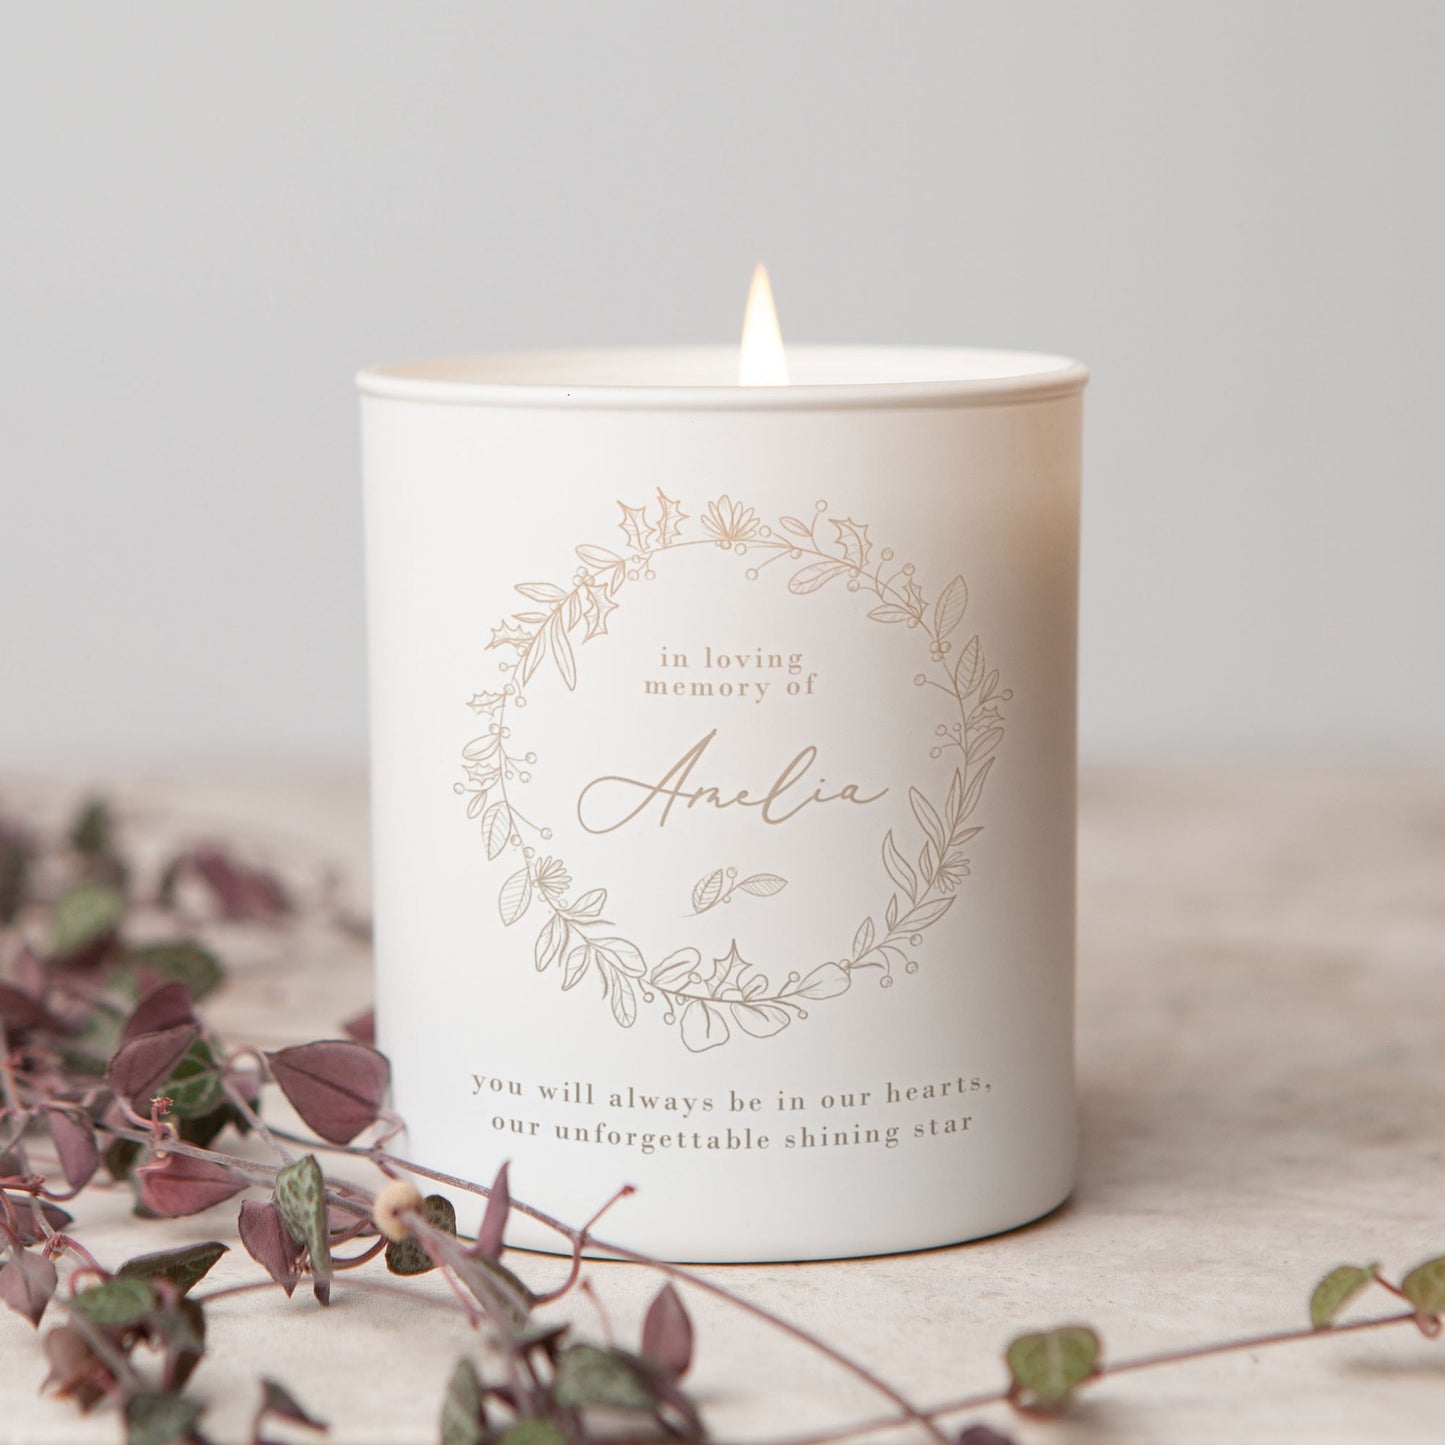 Loving Memory Christmas Candle Remembrance Gift - Kindred Fires